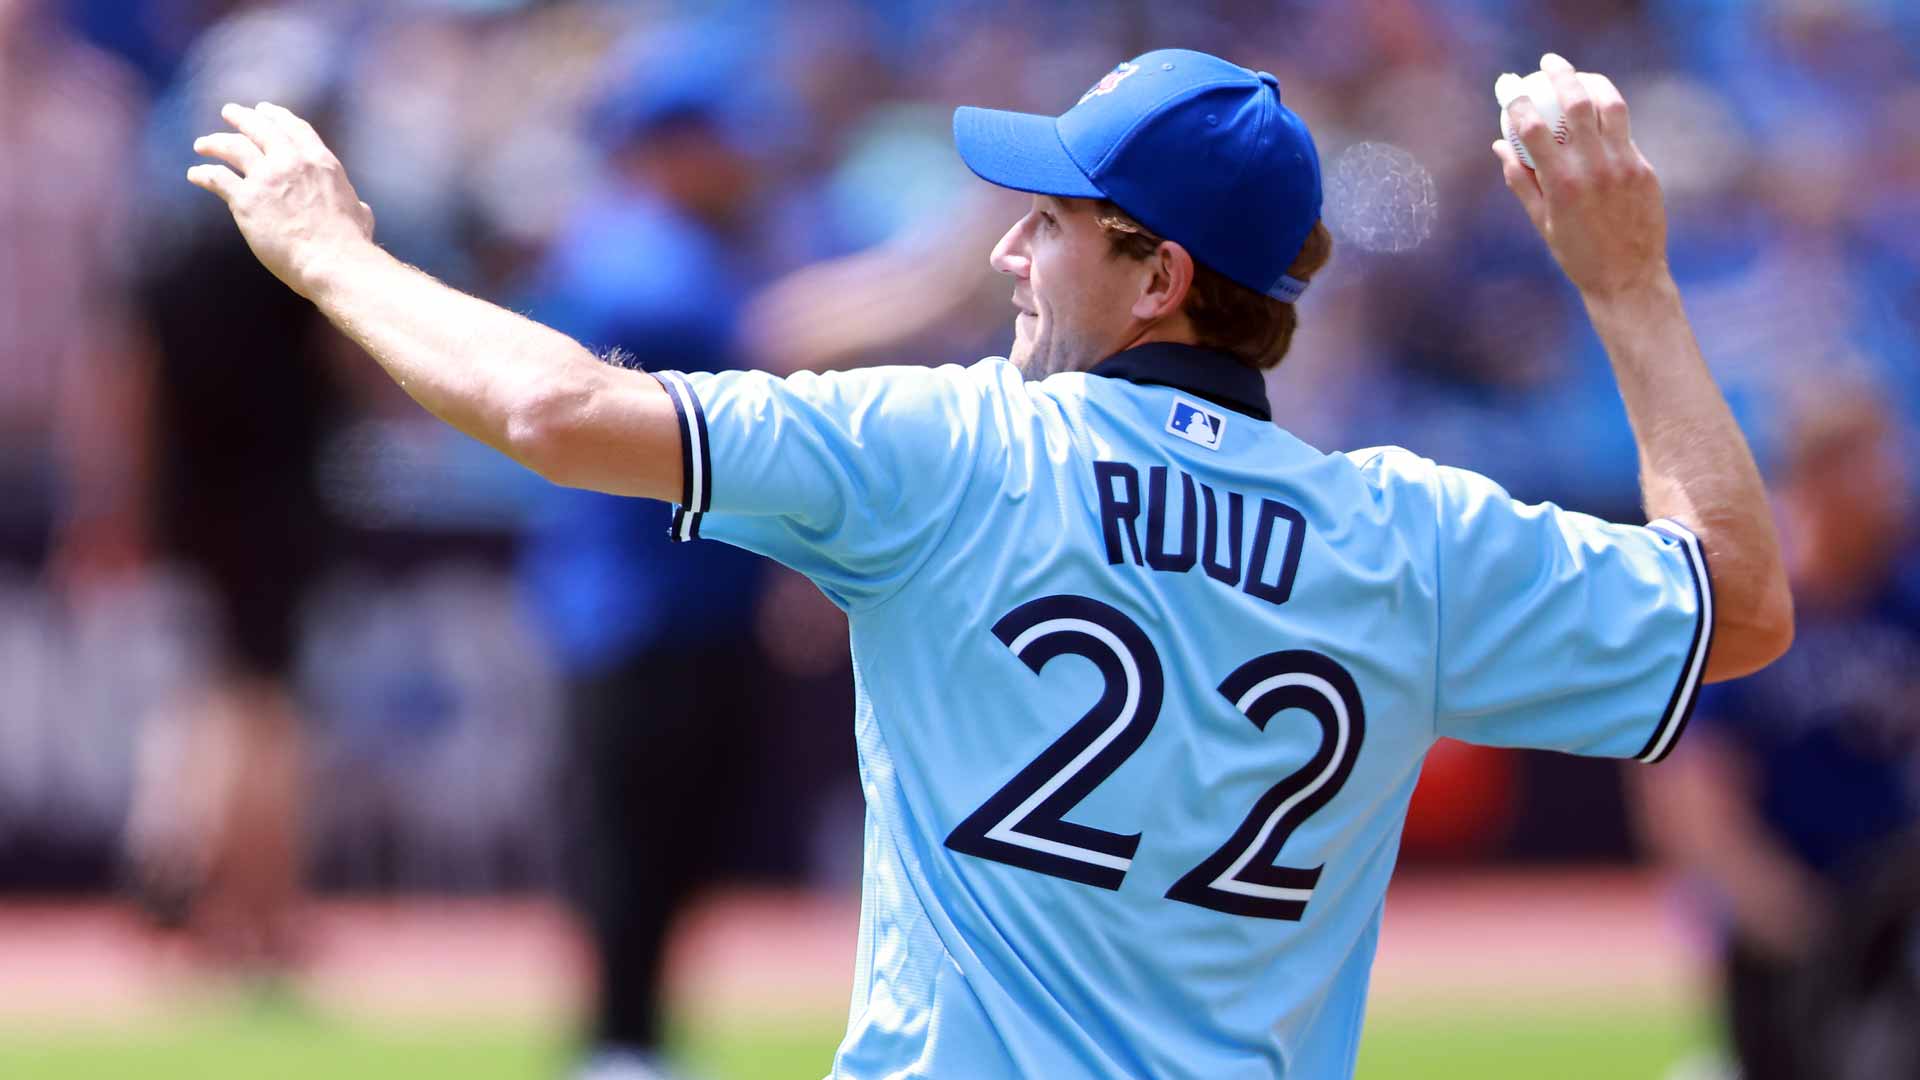 Casper Ruud Throws First Pitch At Toronto Blue Jays Game